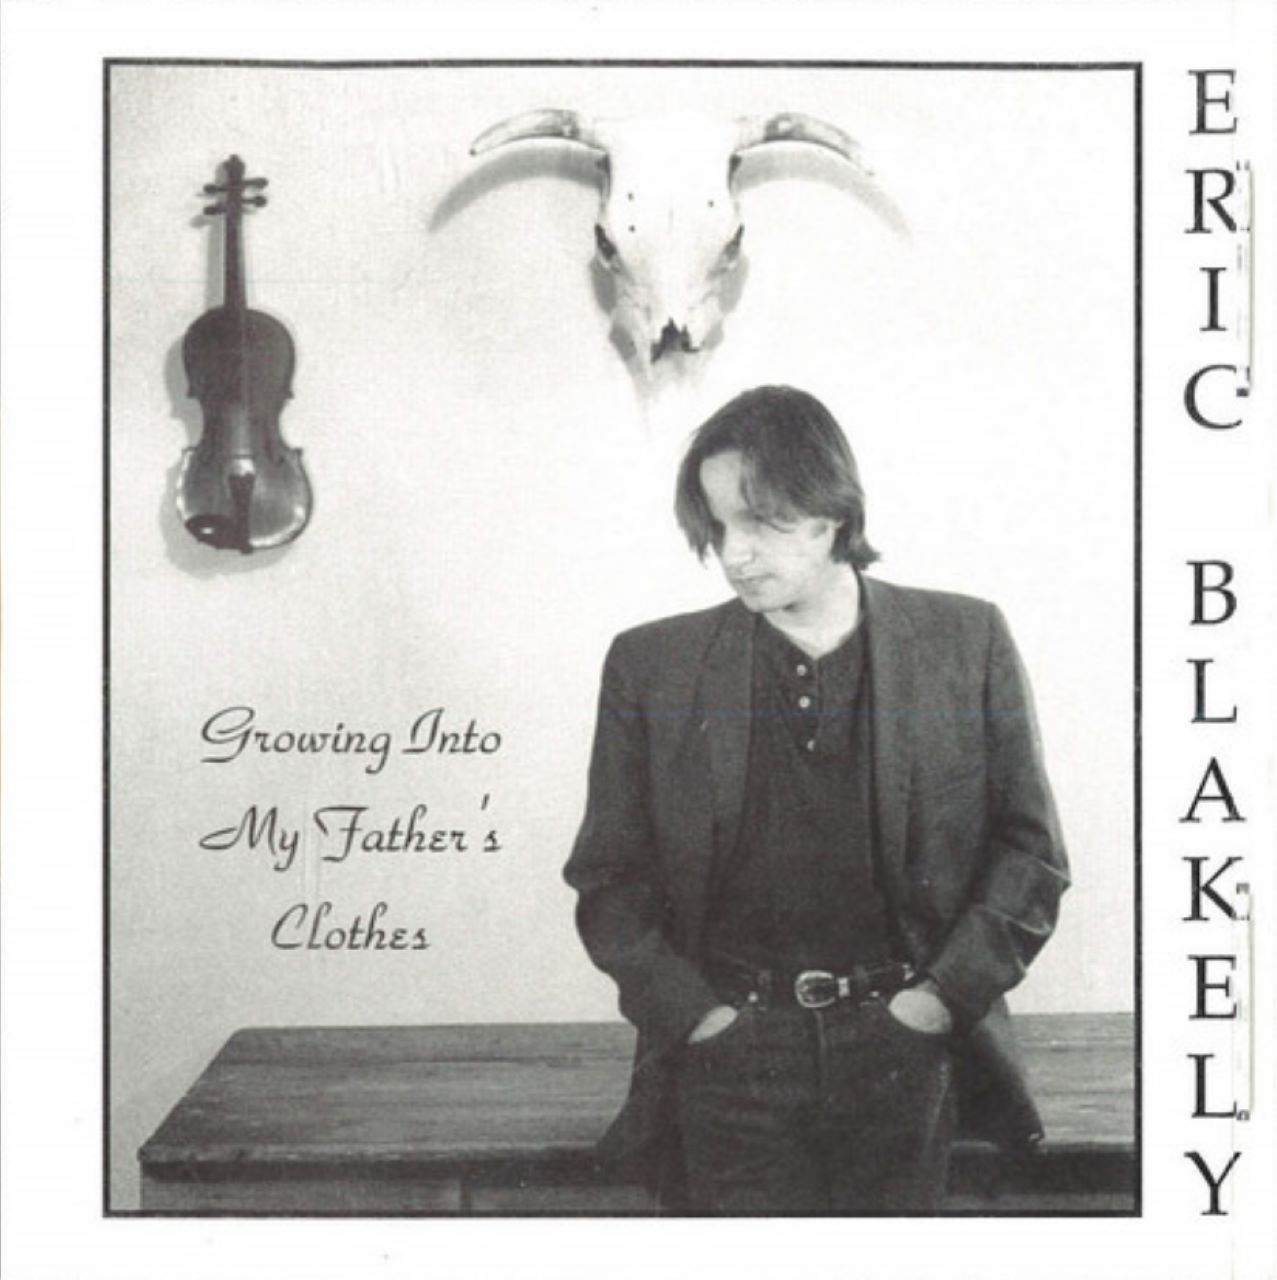 Eric Blakely - Growing Into My Father's Clothes cover album